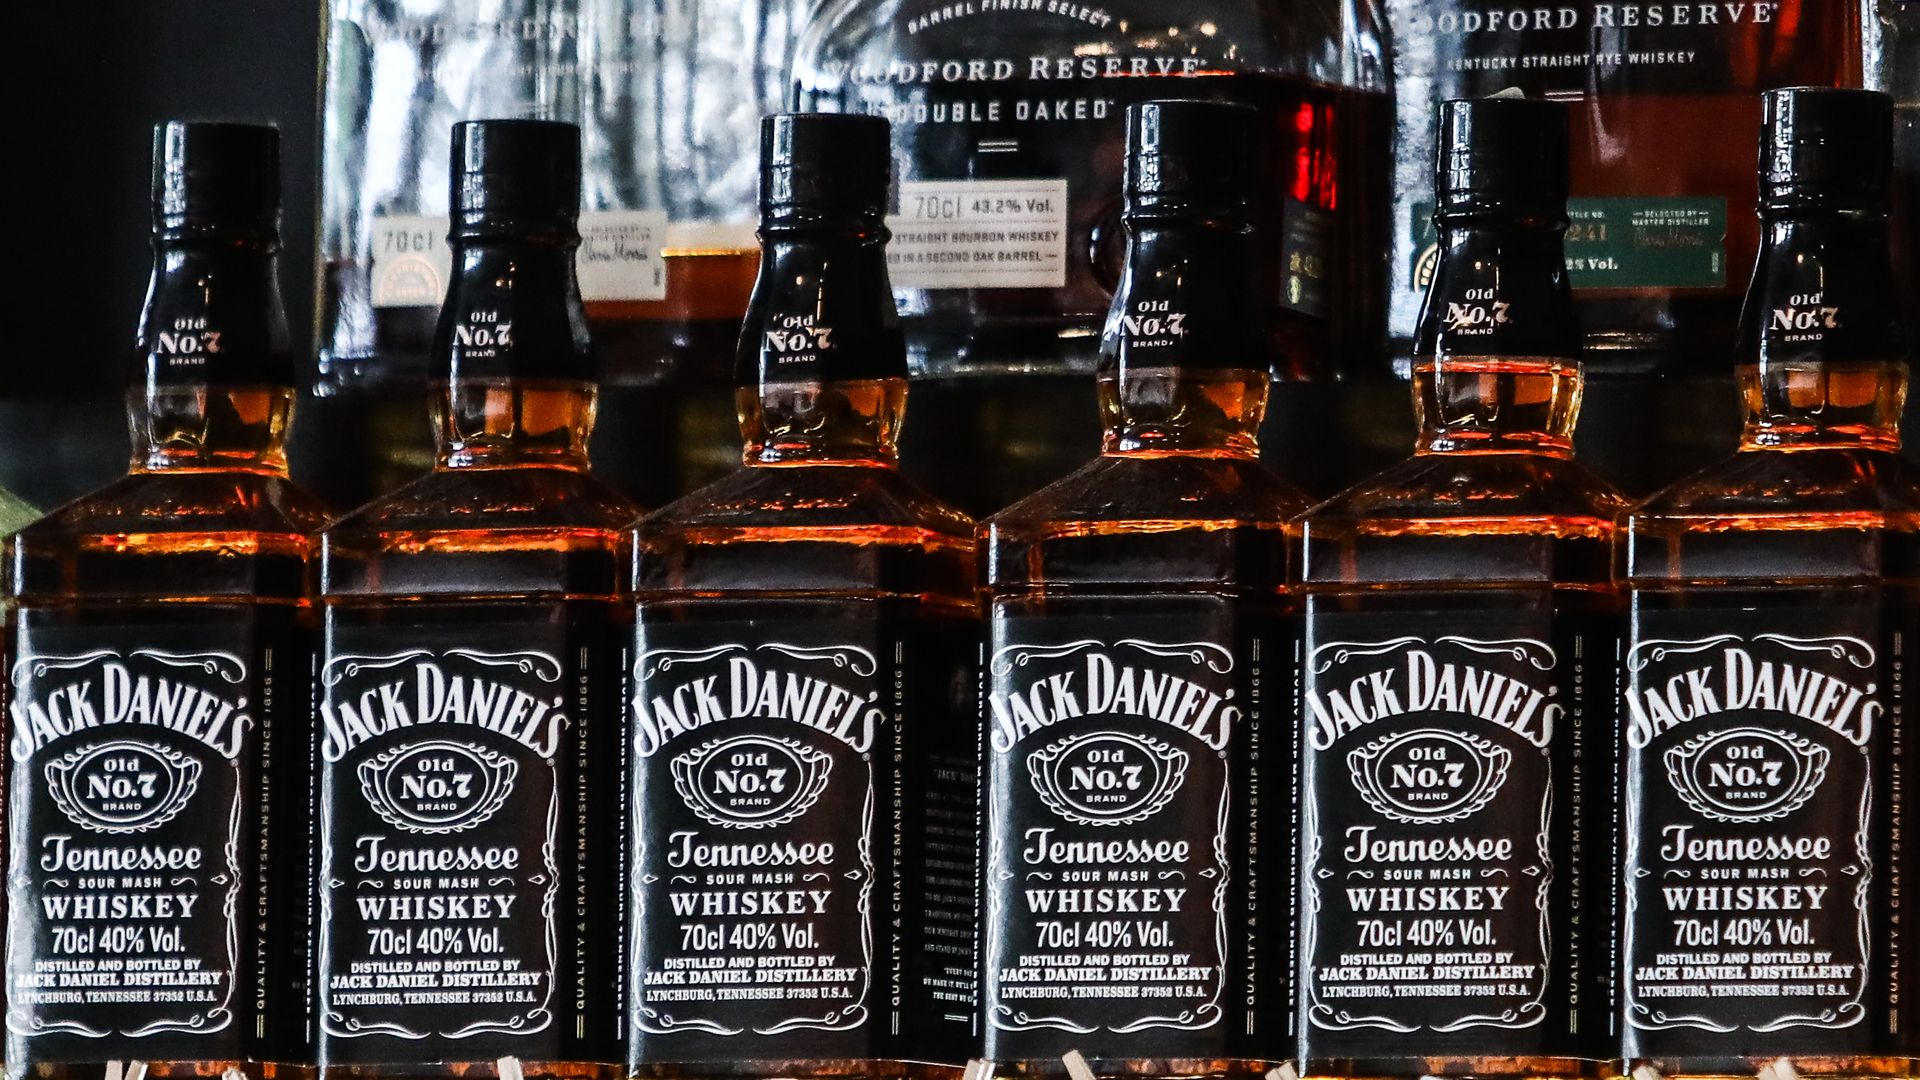 Jack Daniels whiskey bottles are seen in a bar in Krakow, Poland on May 25, 2022